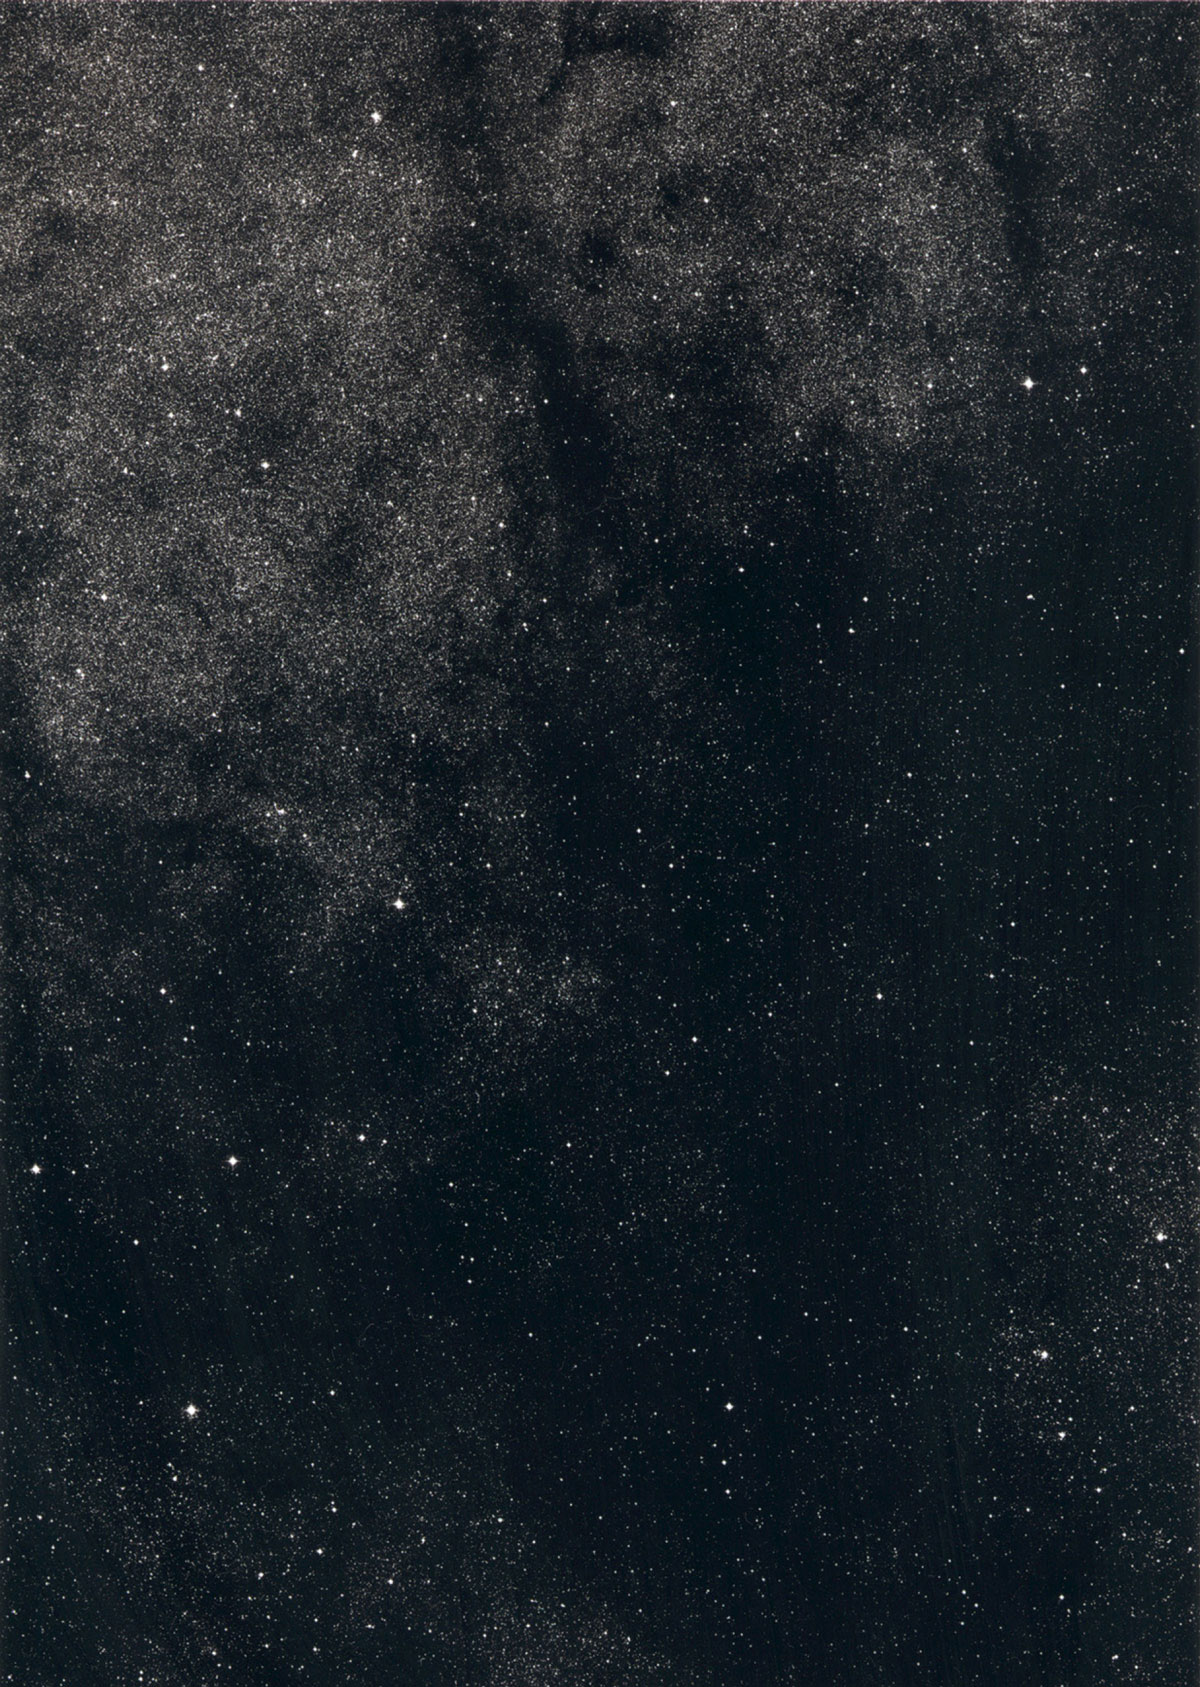 A 1990 photograph by artist Thomas Ruff of stars with the German title Stern 17h 51m/-22°.